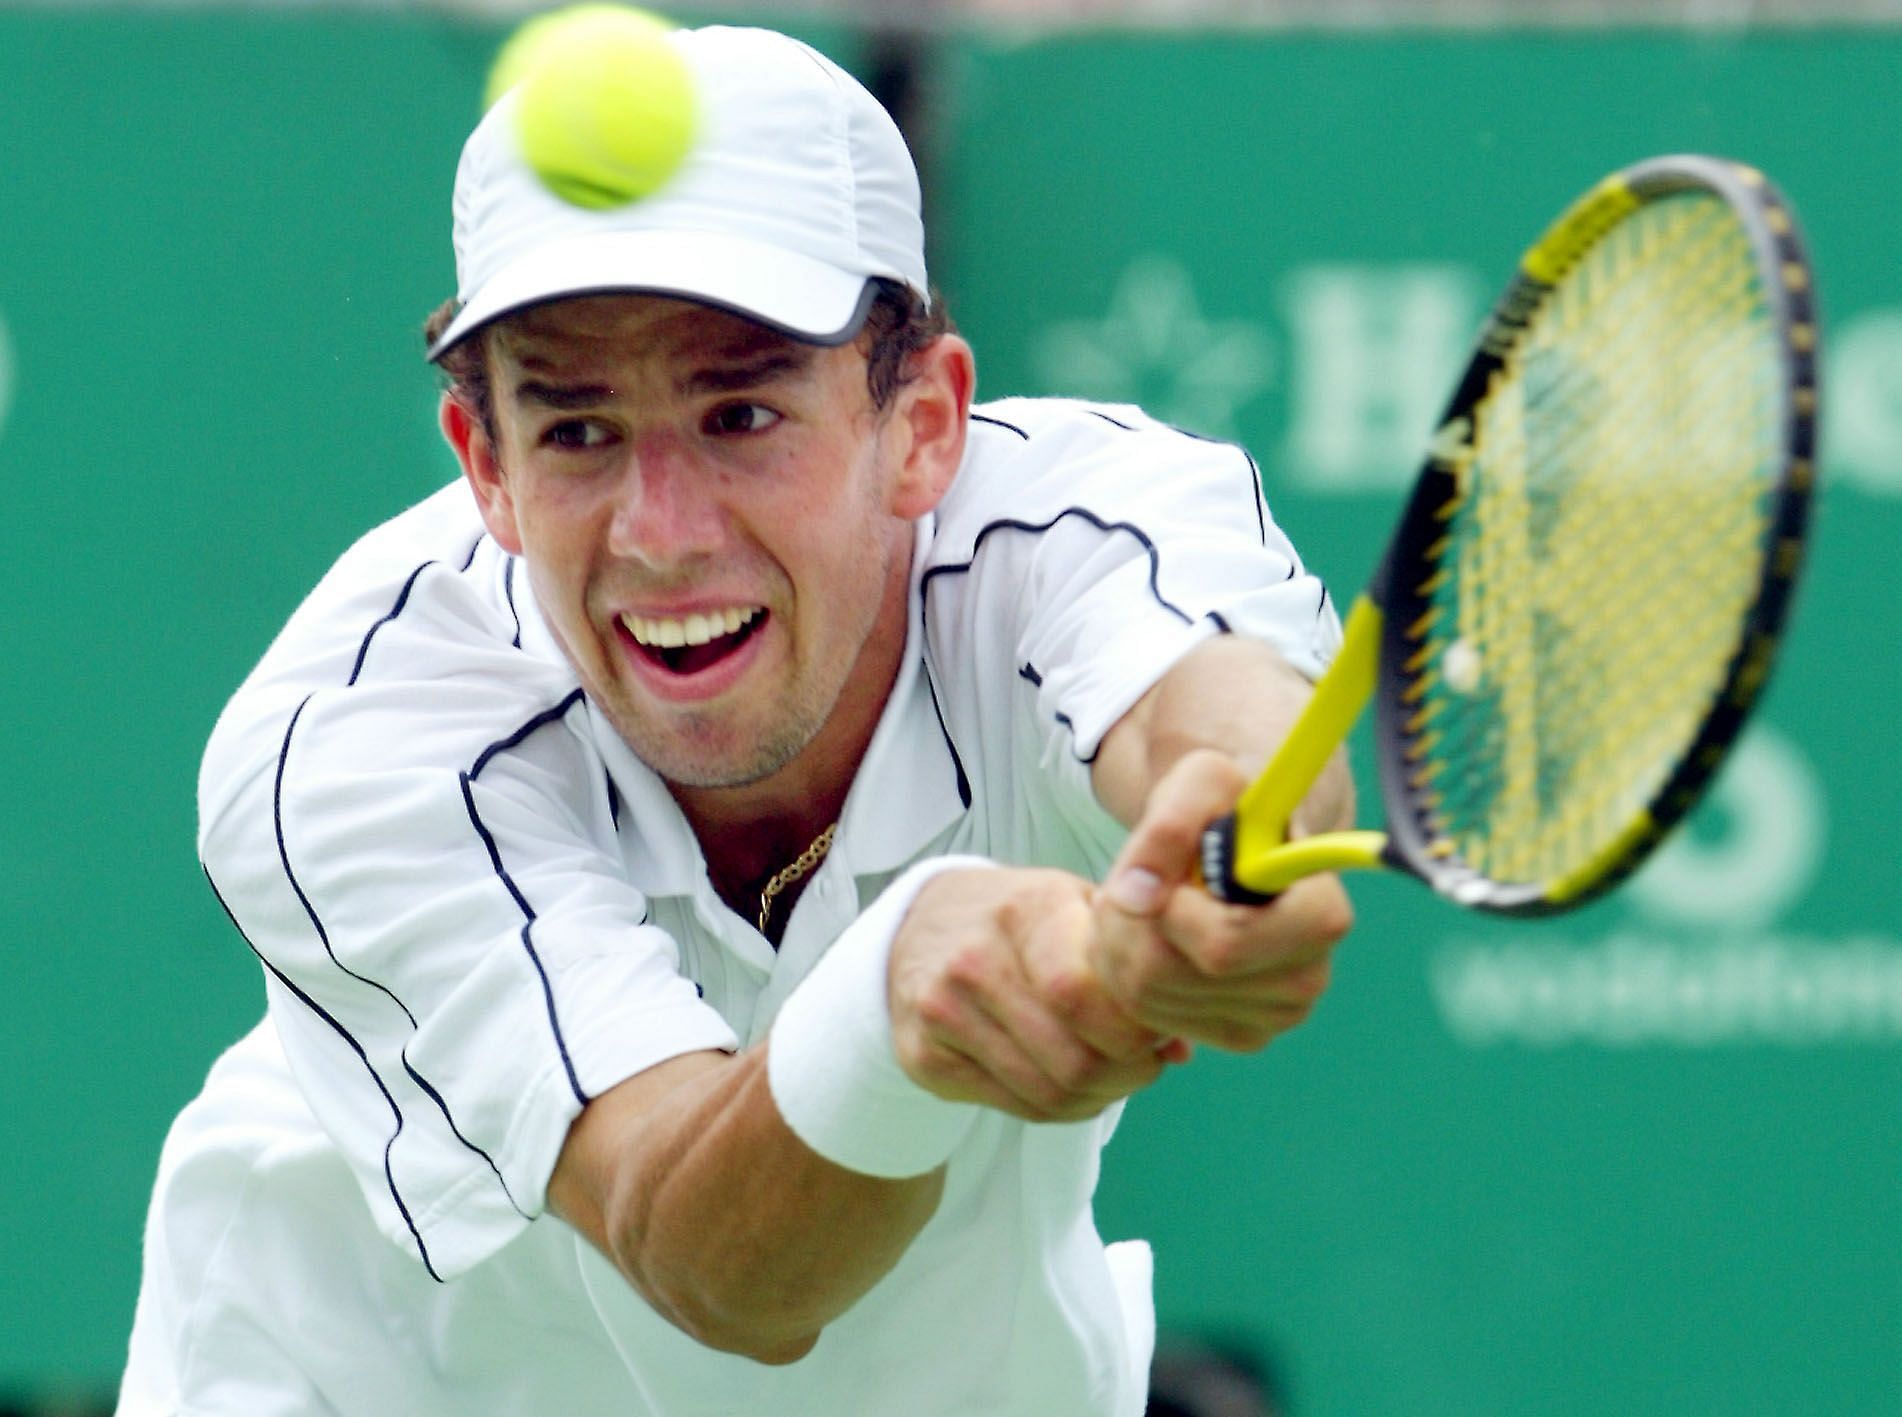 Hrbaty beat Rafael Nadal in three out of four encounters